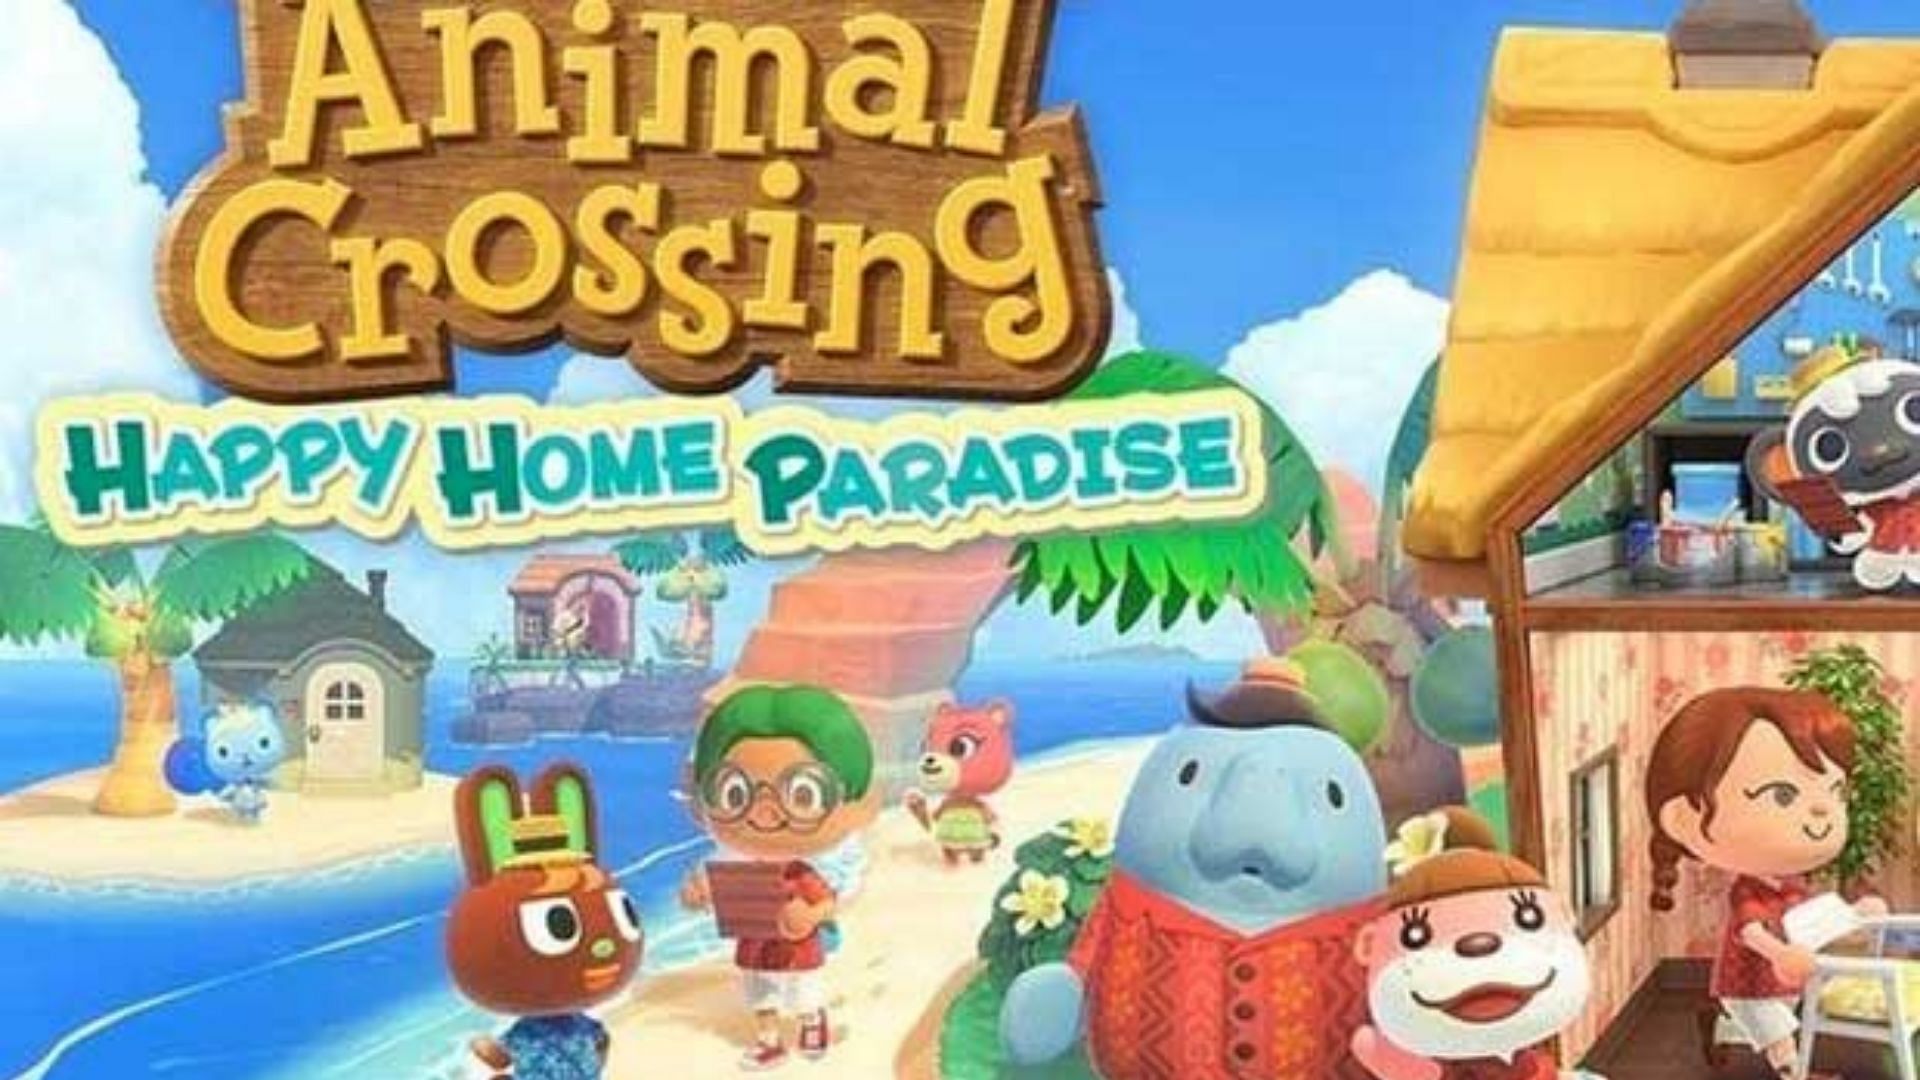 The Happy Home Paradise is the only paid DLC in Animal Crossing: New Horizons (Image via Nintendo Life)